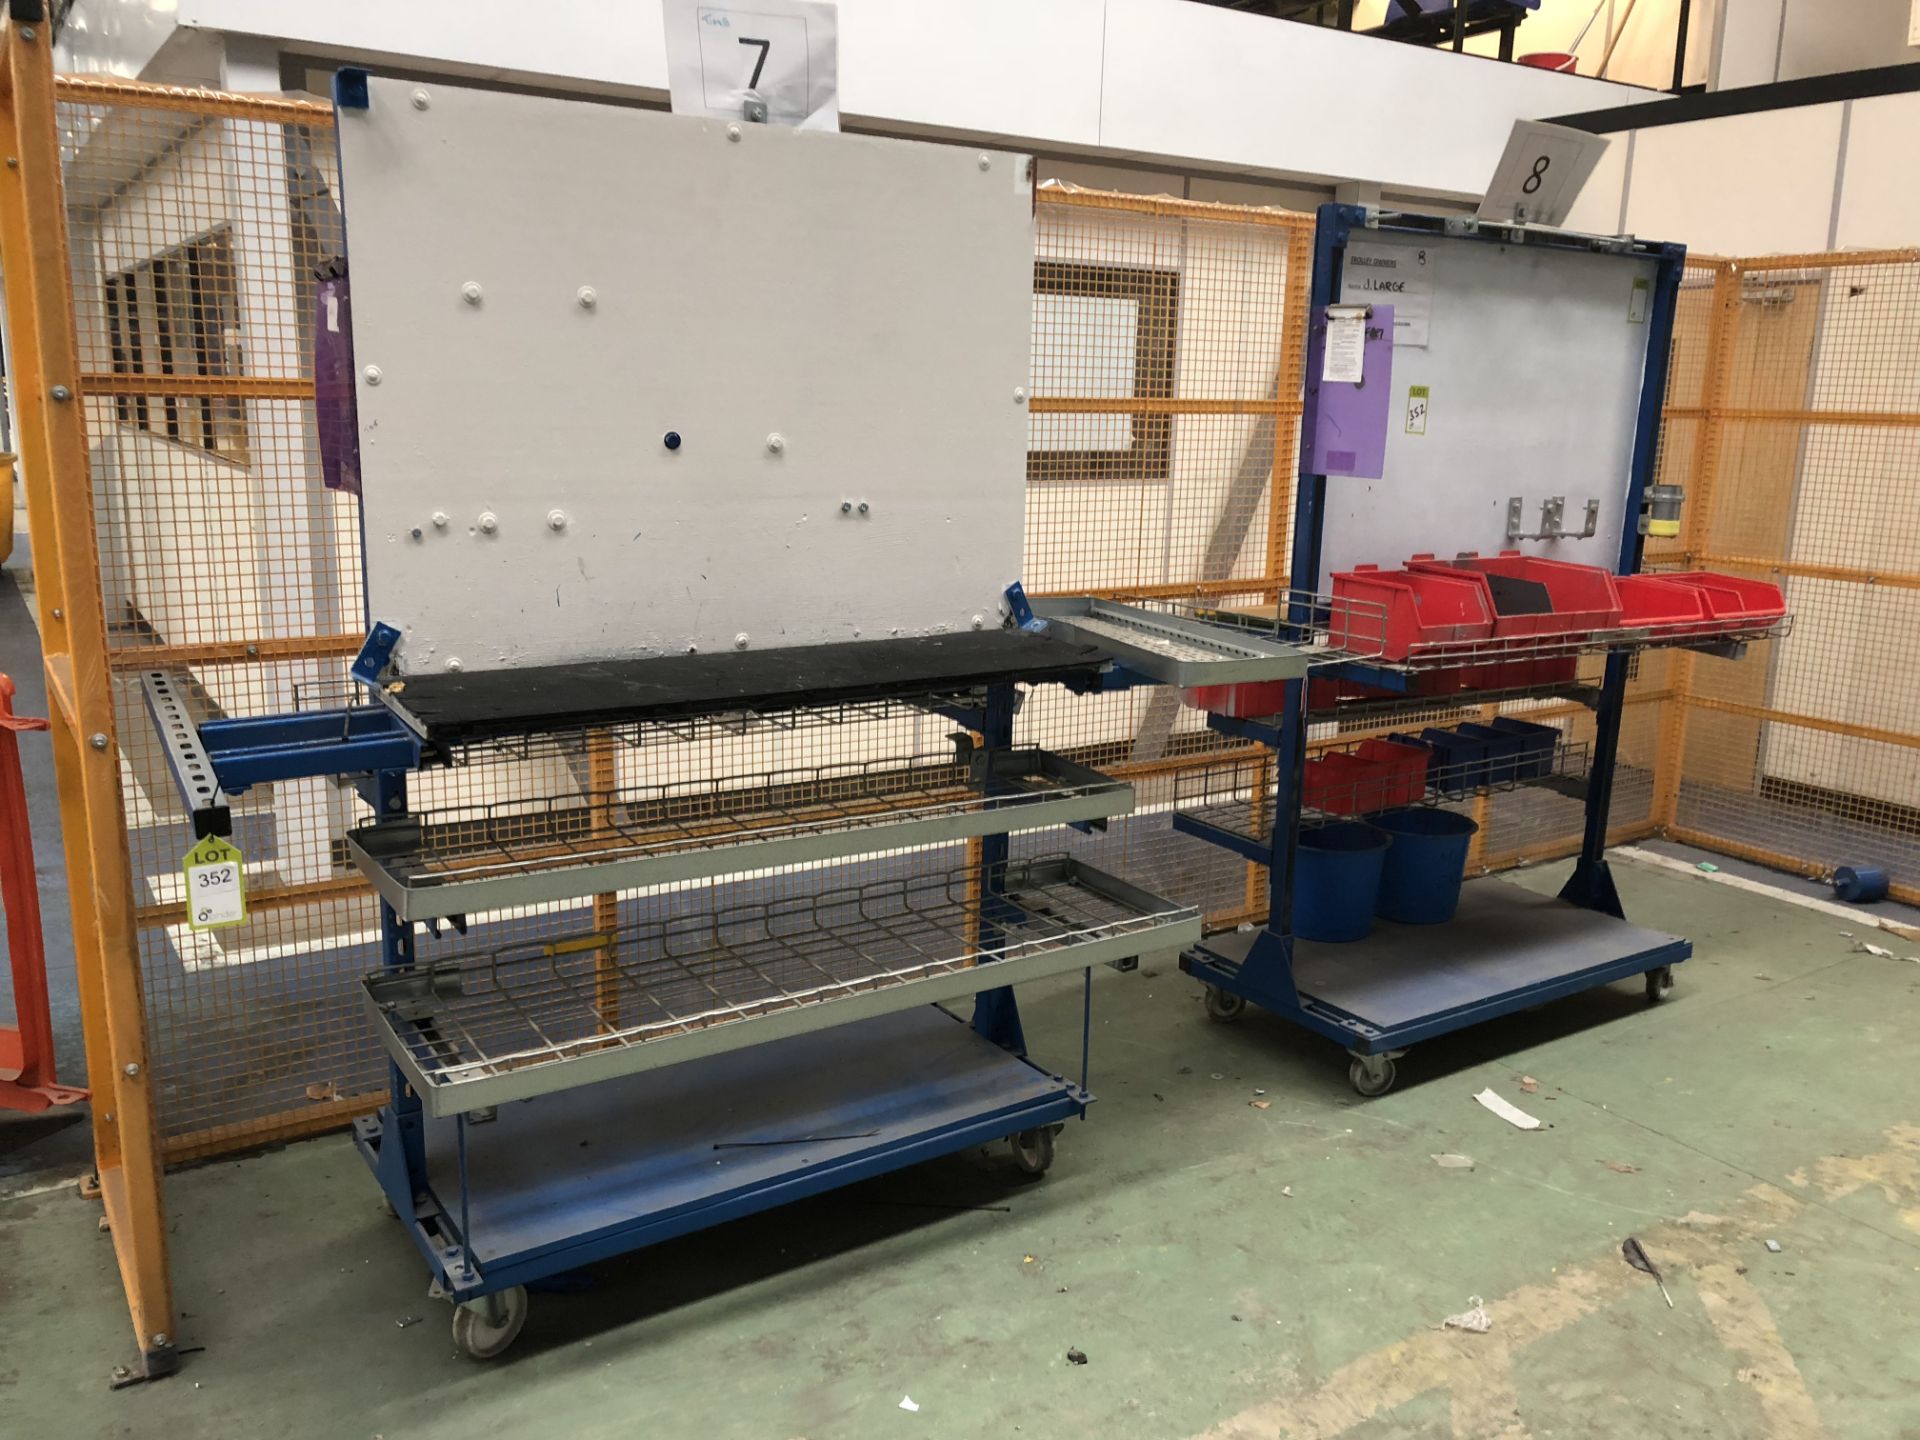 2 fabricated Work Trolleys (located in Bay 4)